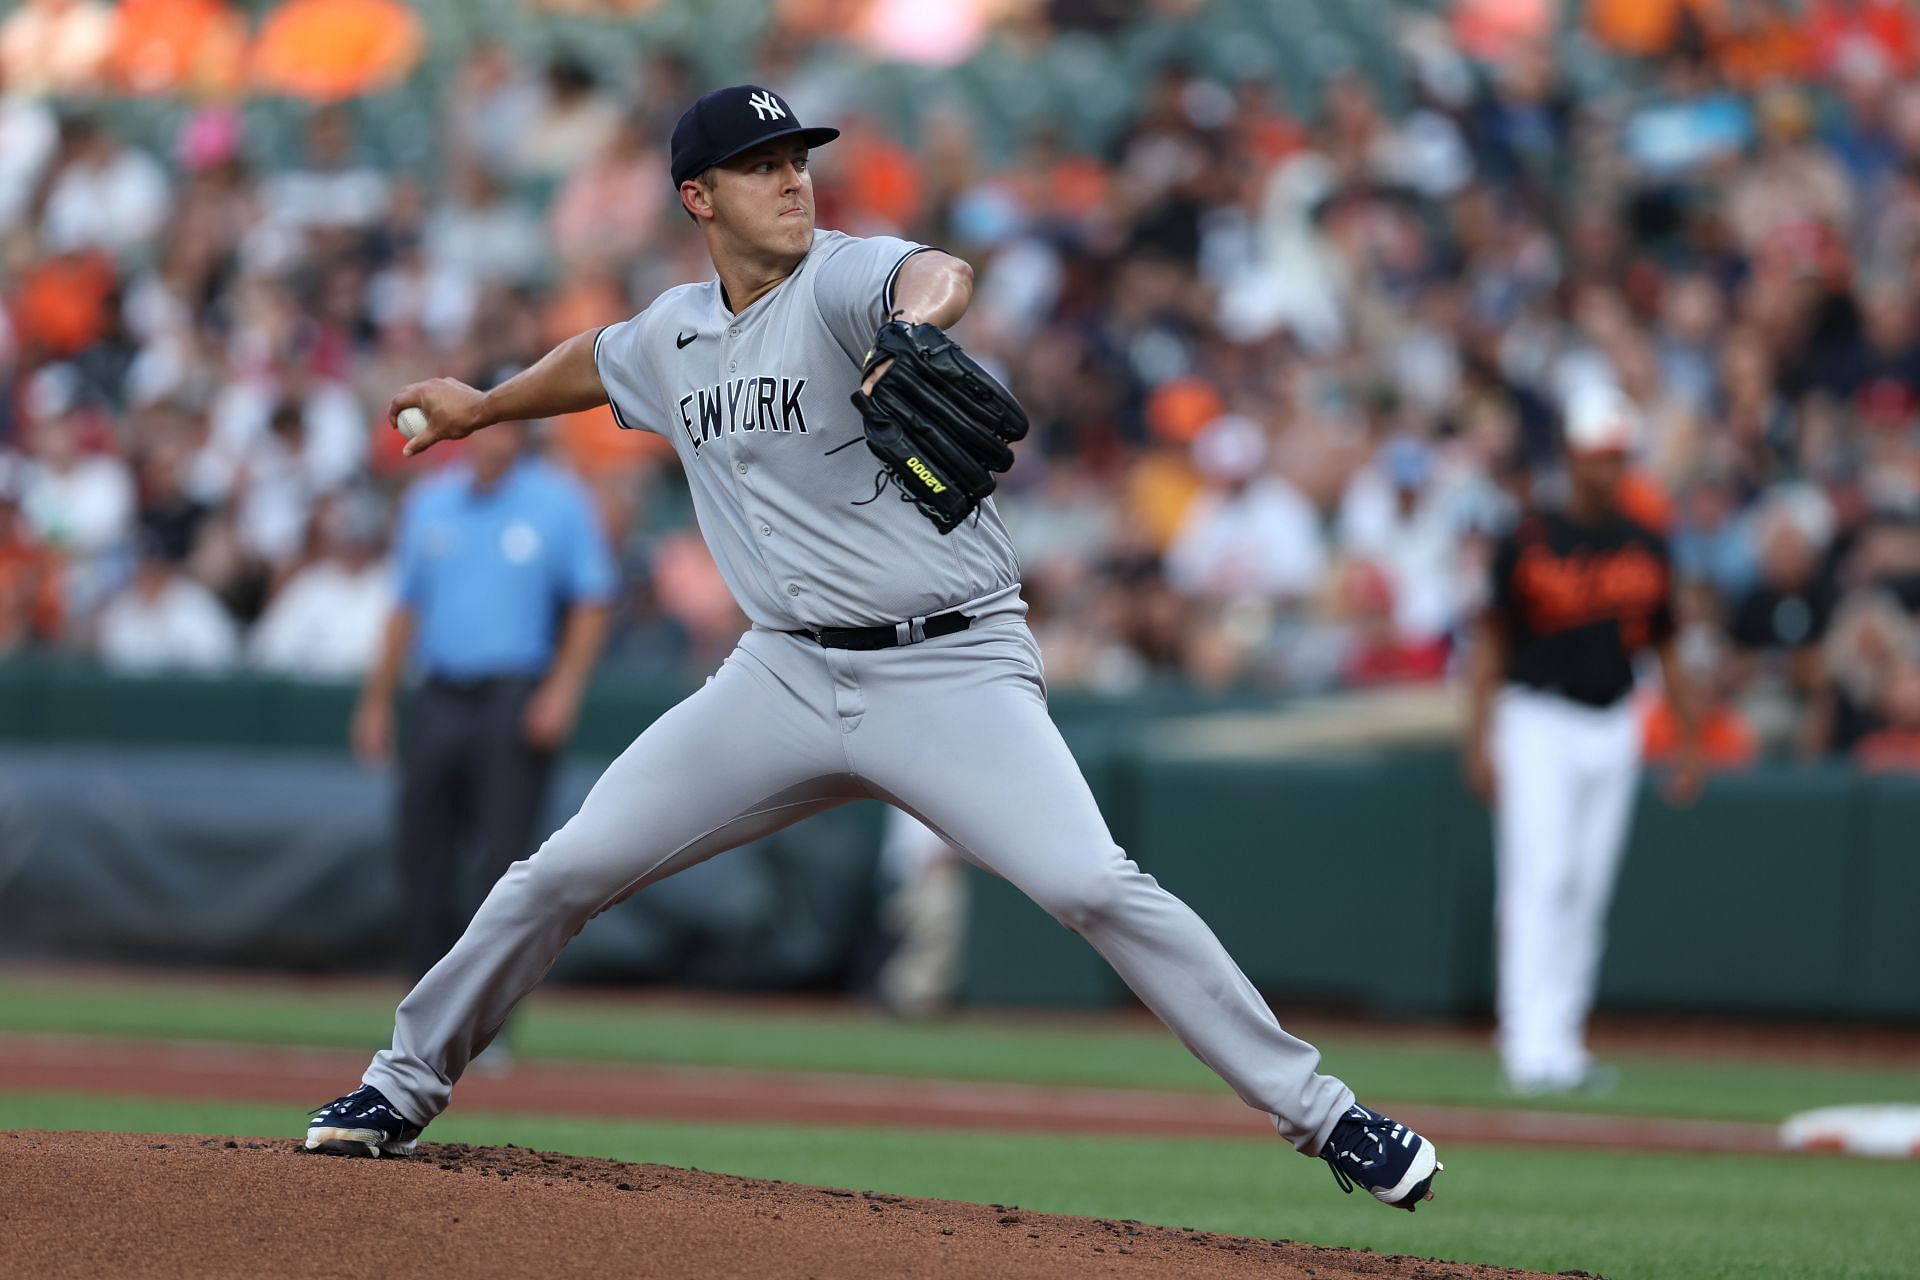 Jameson Tailon leads the Yankees with 10 wins.